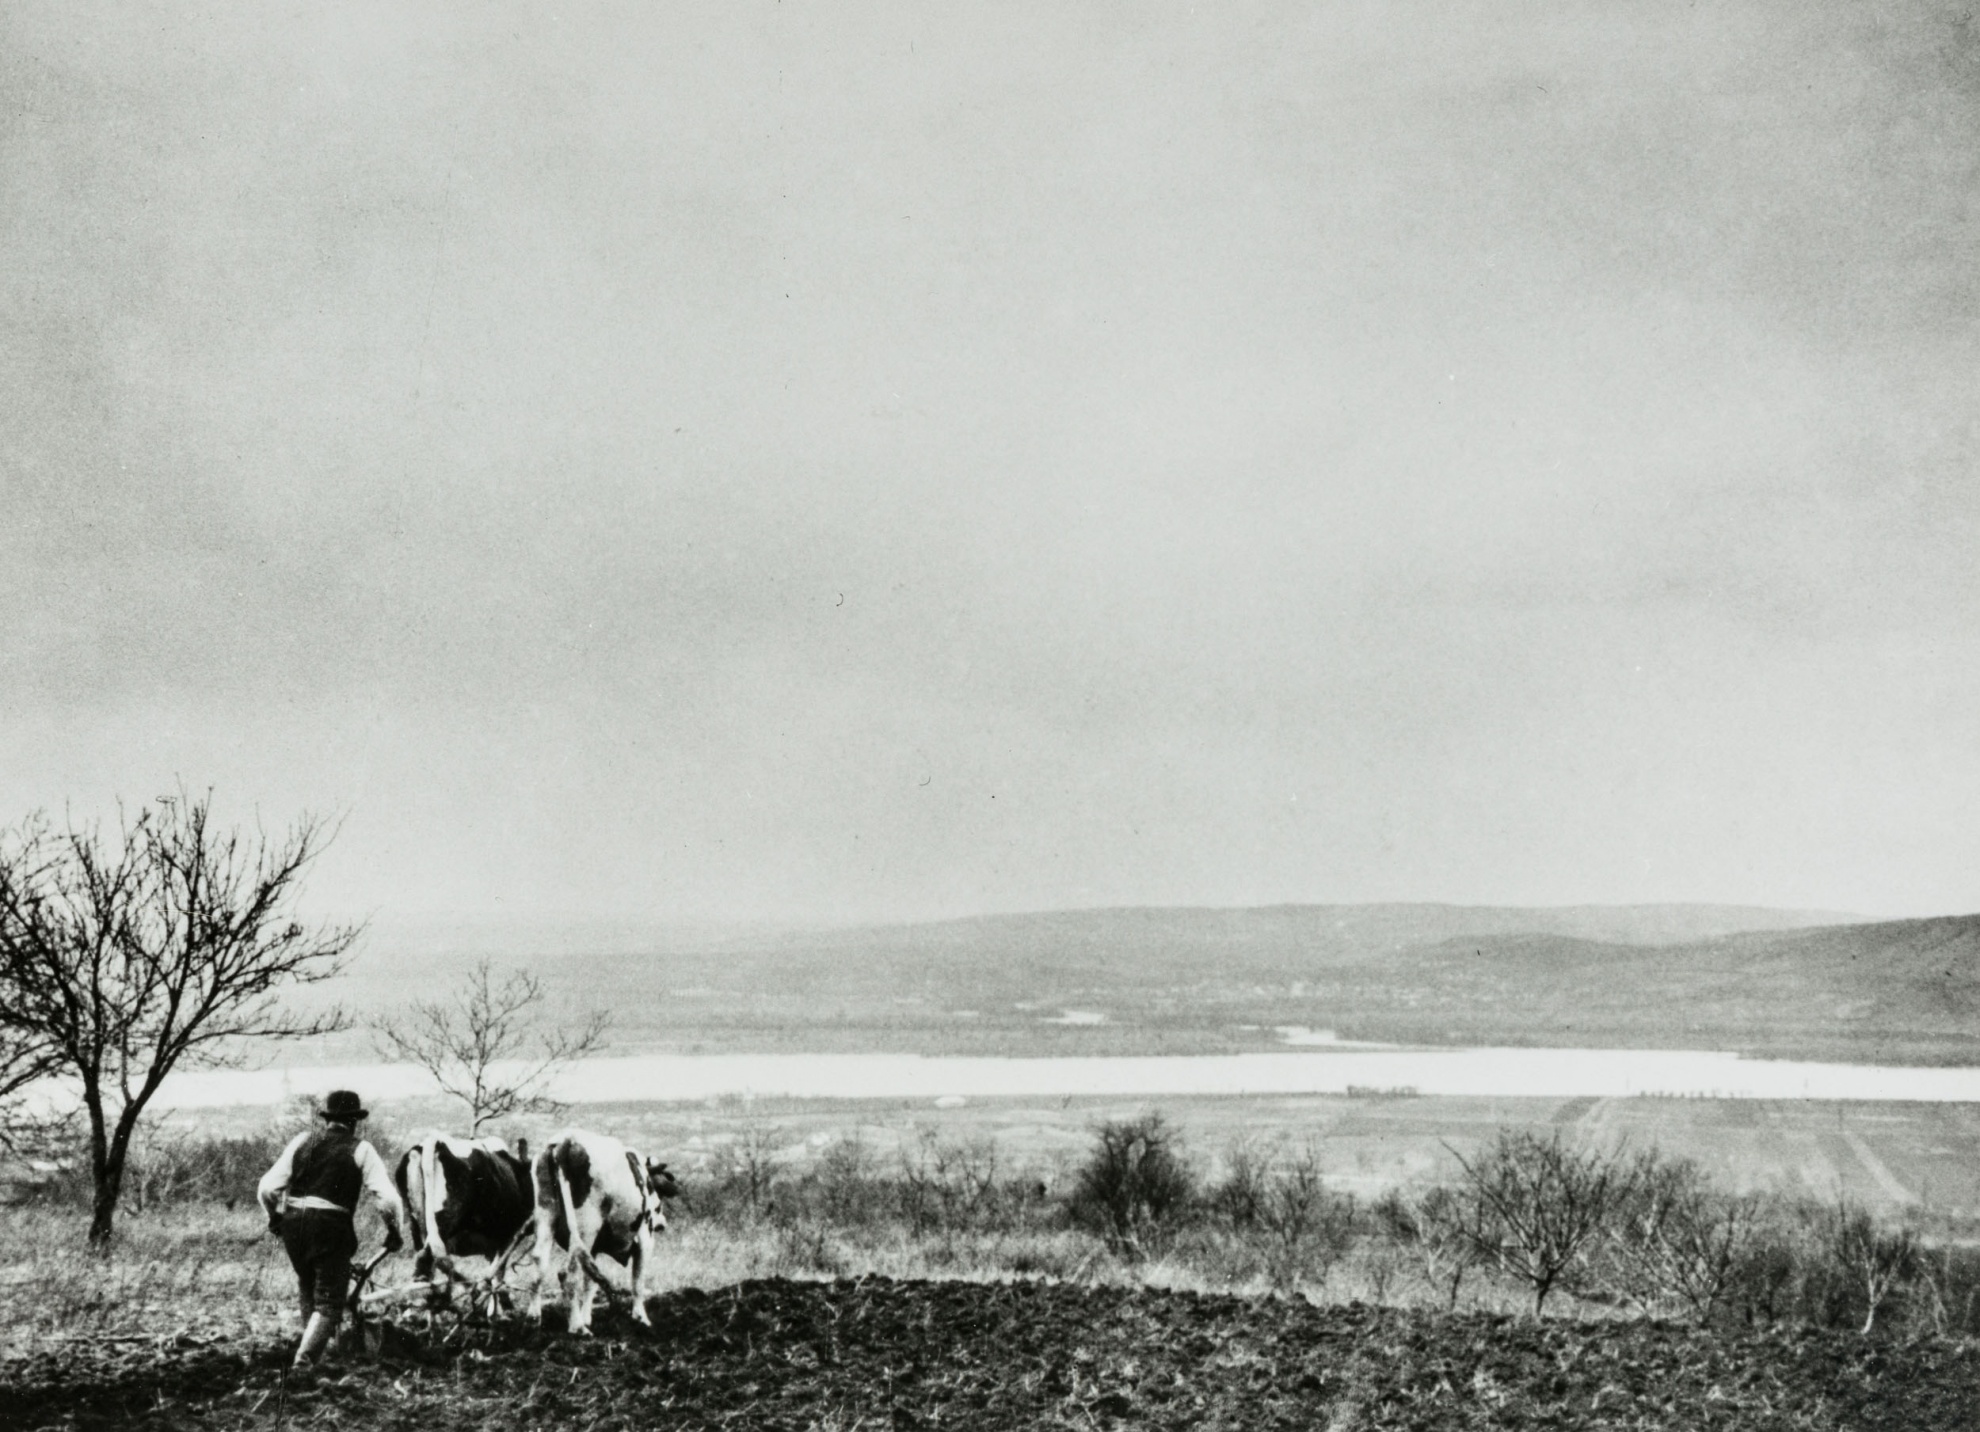 Esztergom (plowing scene) (The Salgo Trust for Education CC BY-NC-SA)